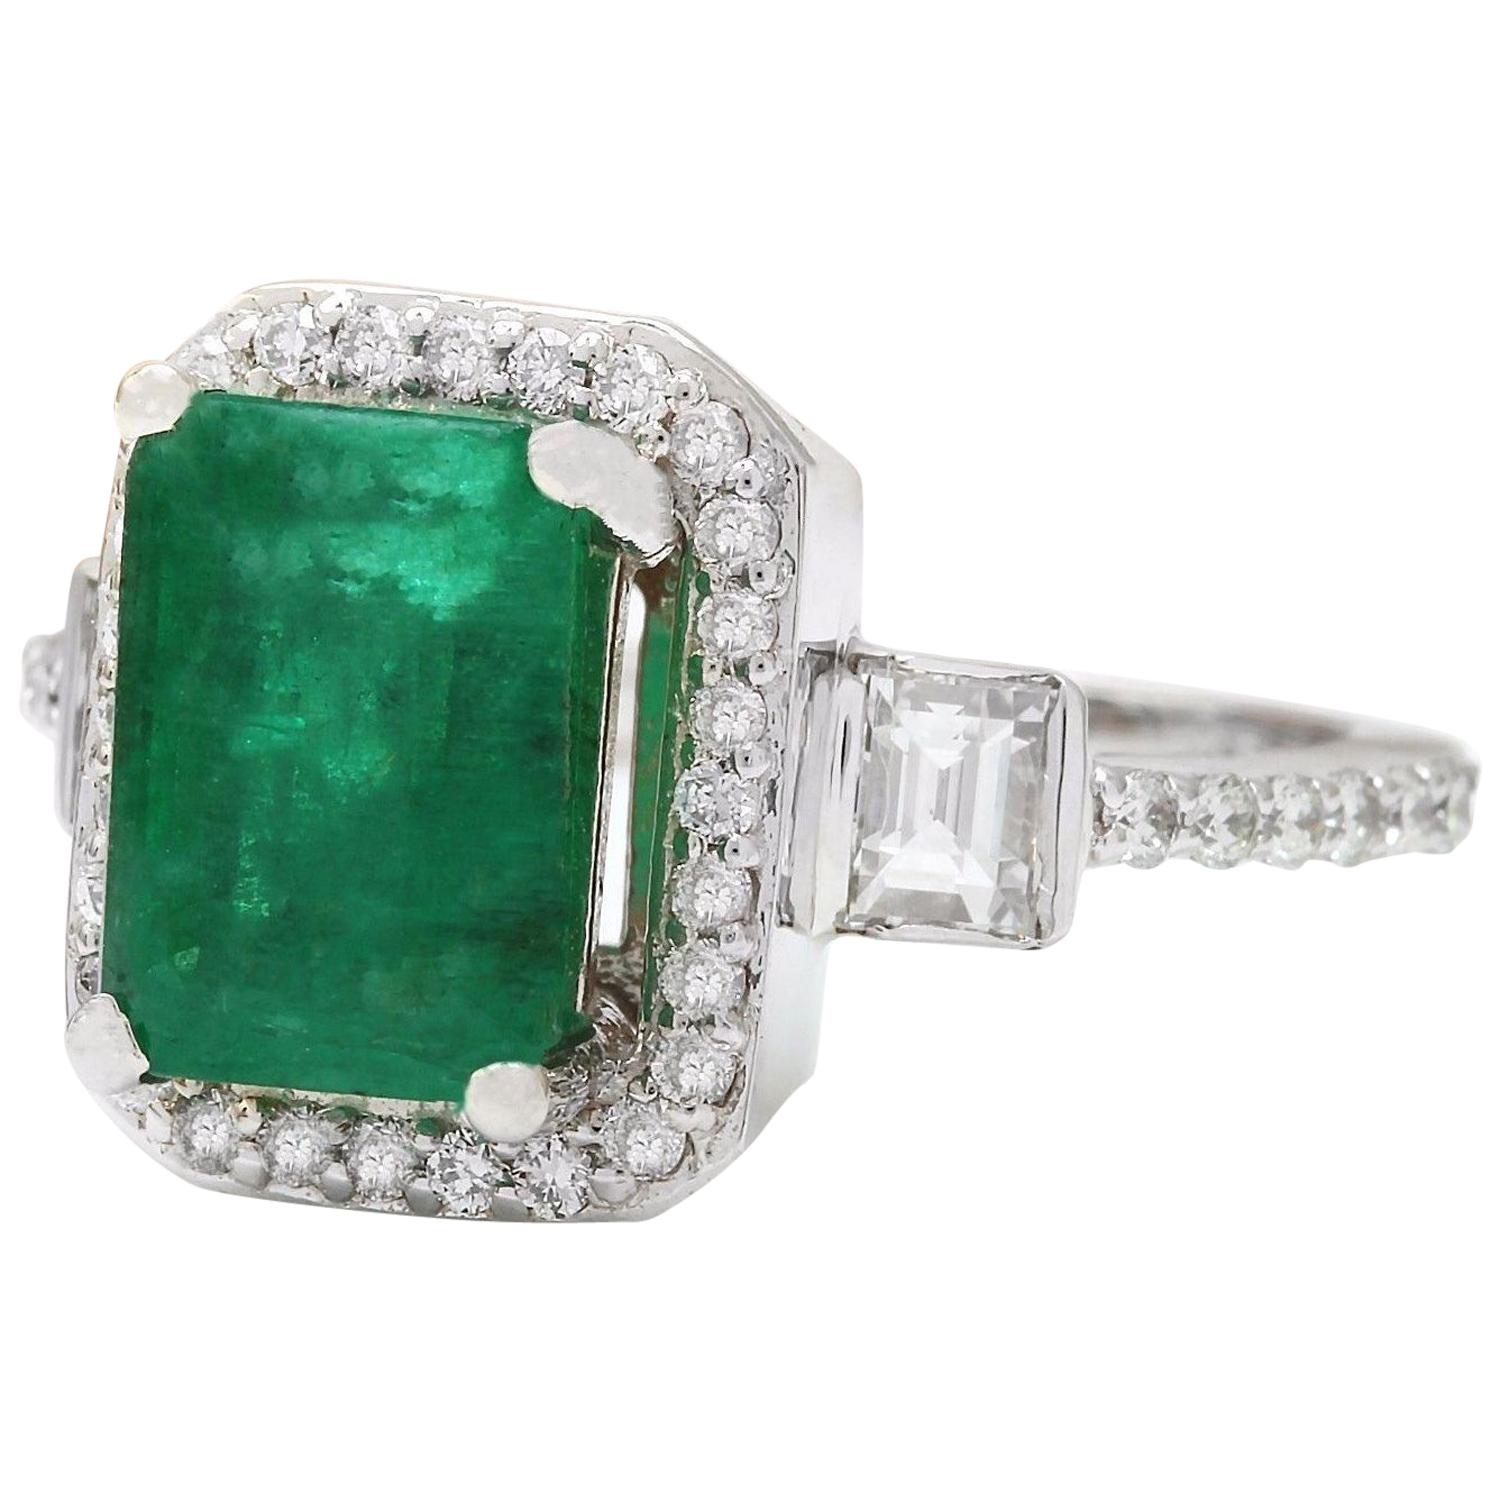 3.58 Carat Natural Emerald 14K Solid White Gold Diamond Ring
 Item Type: Ring
 Item Style: Engagement
 Material: 14K White Gold
 Mainstone: Emerald
 Stone Color: Green
 Stone Weight: 2.58 Carat
 Stone Shape: Emerald
 Stone Quantity: 1
 Stone